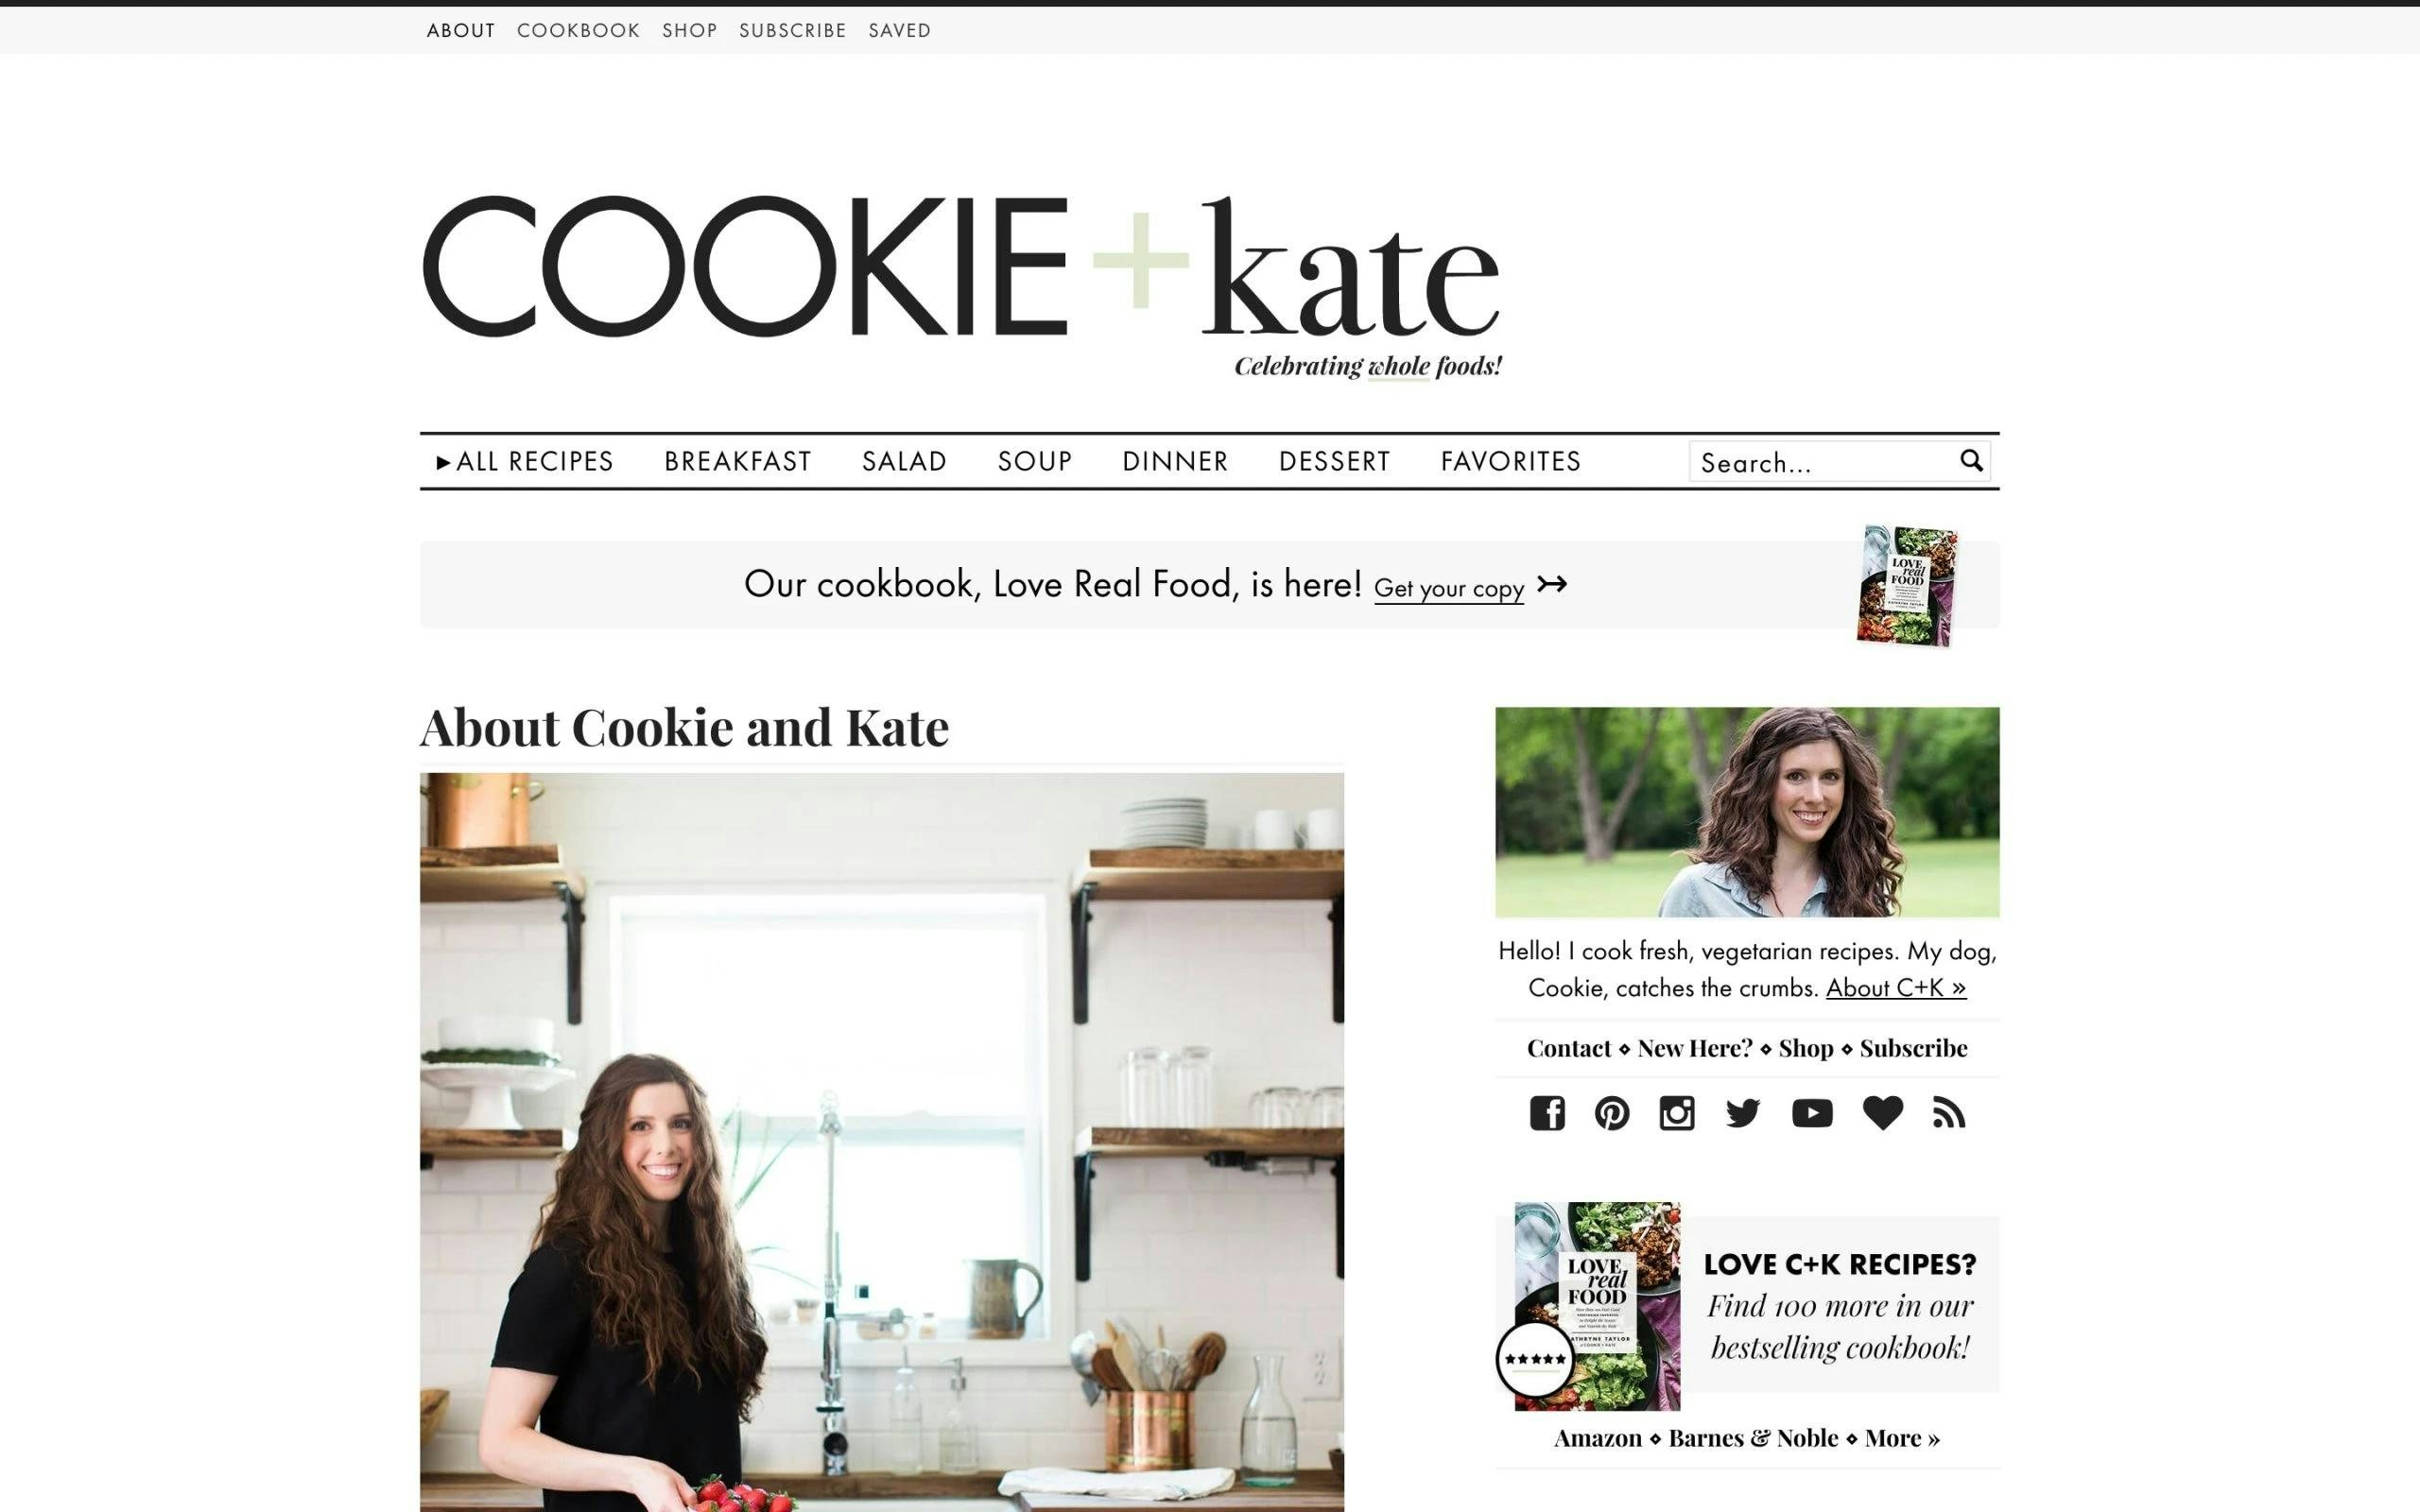 COOKIE + Kate about me page